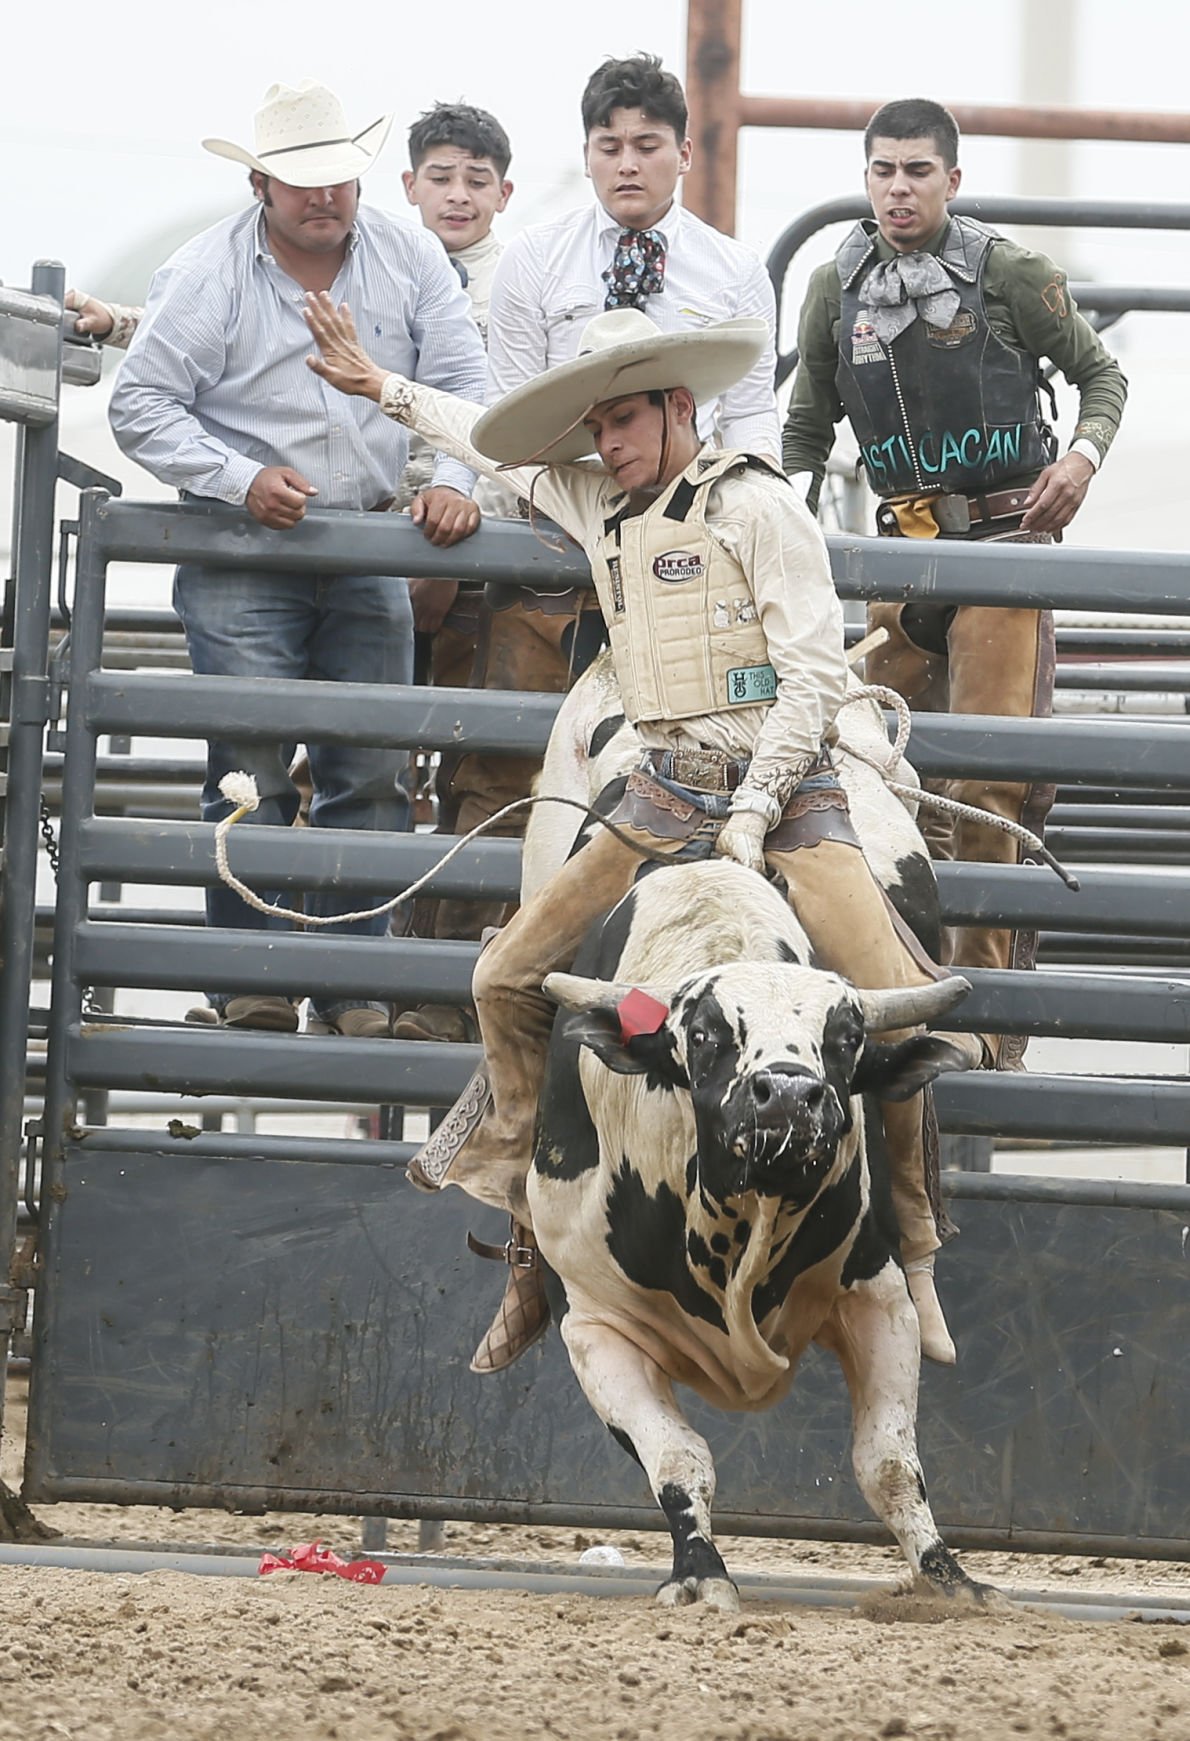 Mexican rodeo tradition alive in Bakersfield News